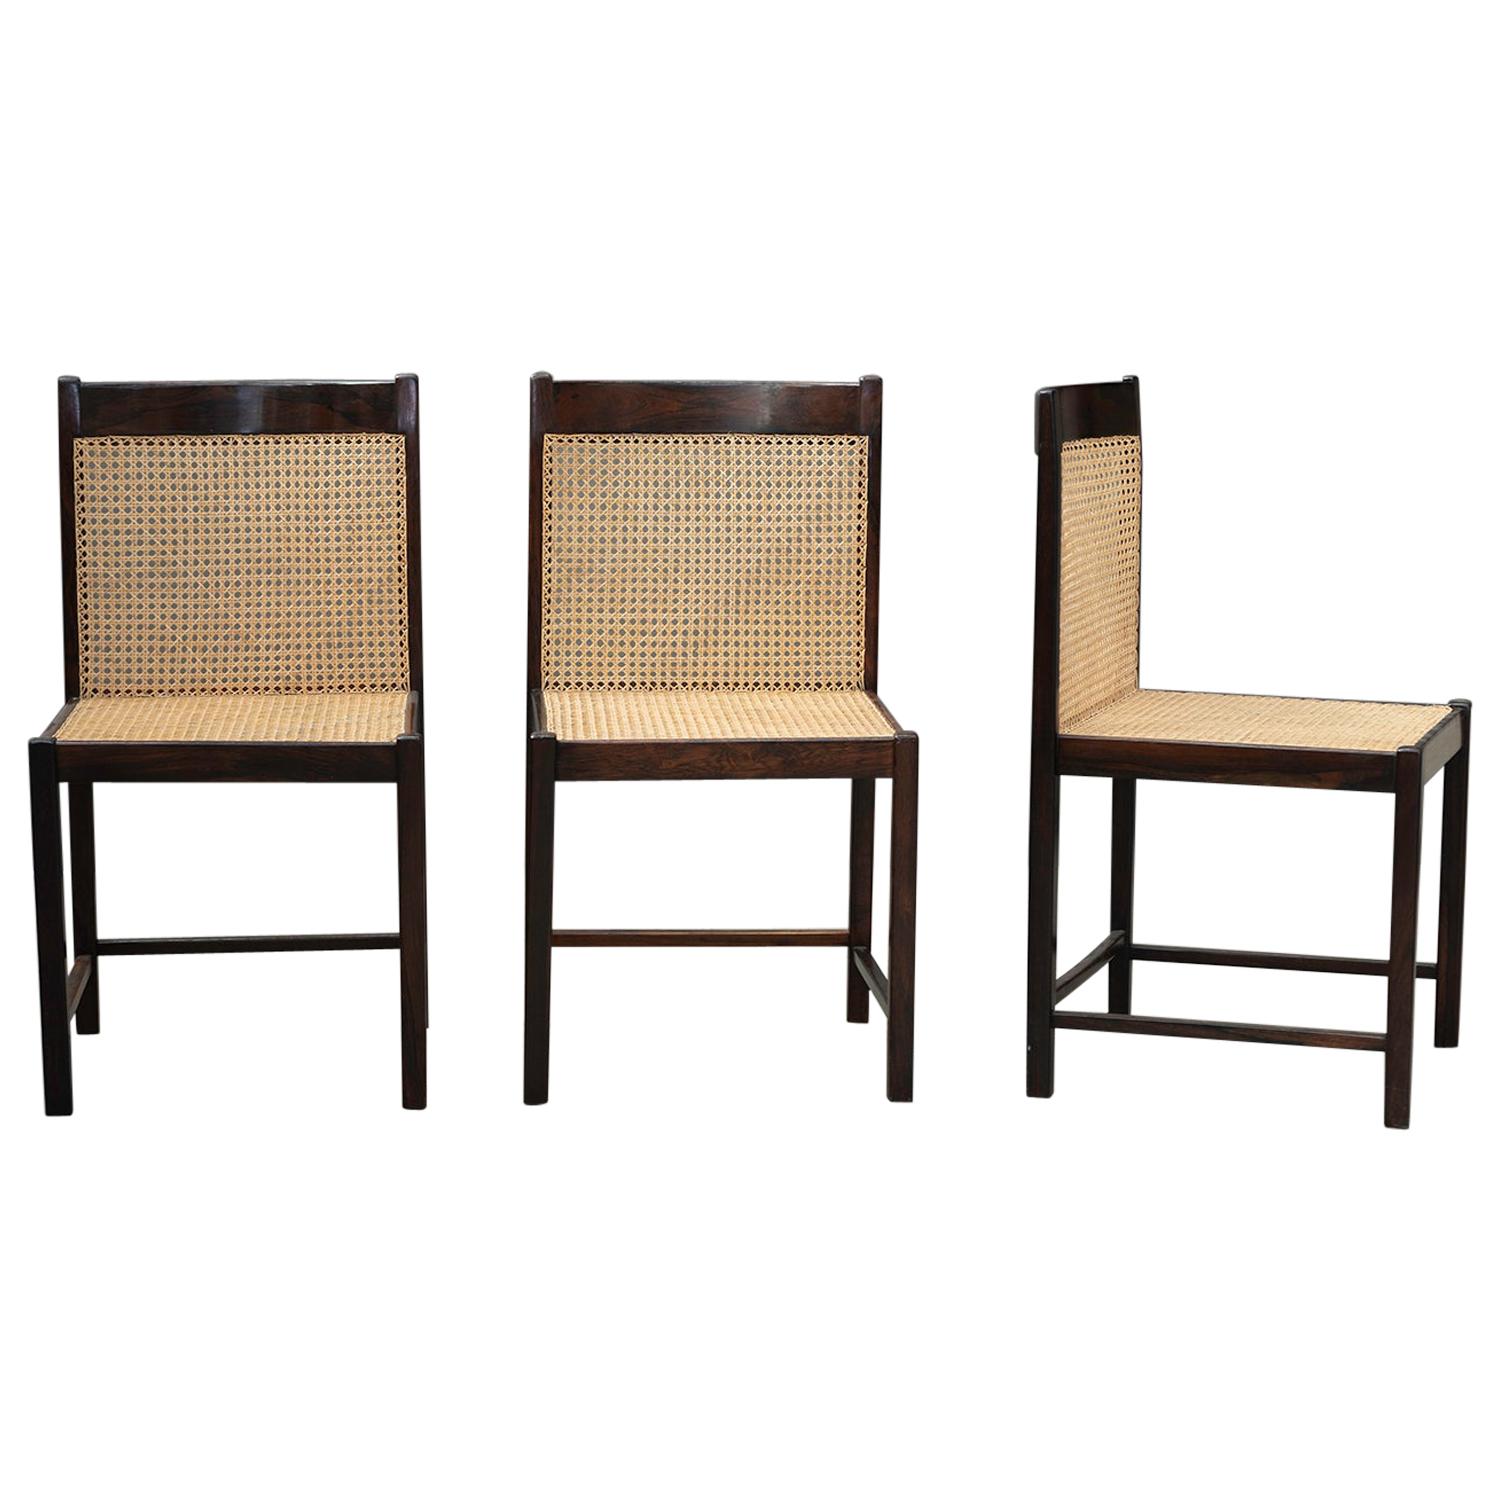 Set of Brazilian Rosewood and Straw Dining Chairs. Brazilian Midcentury Design